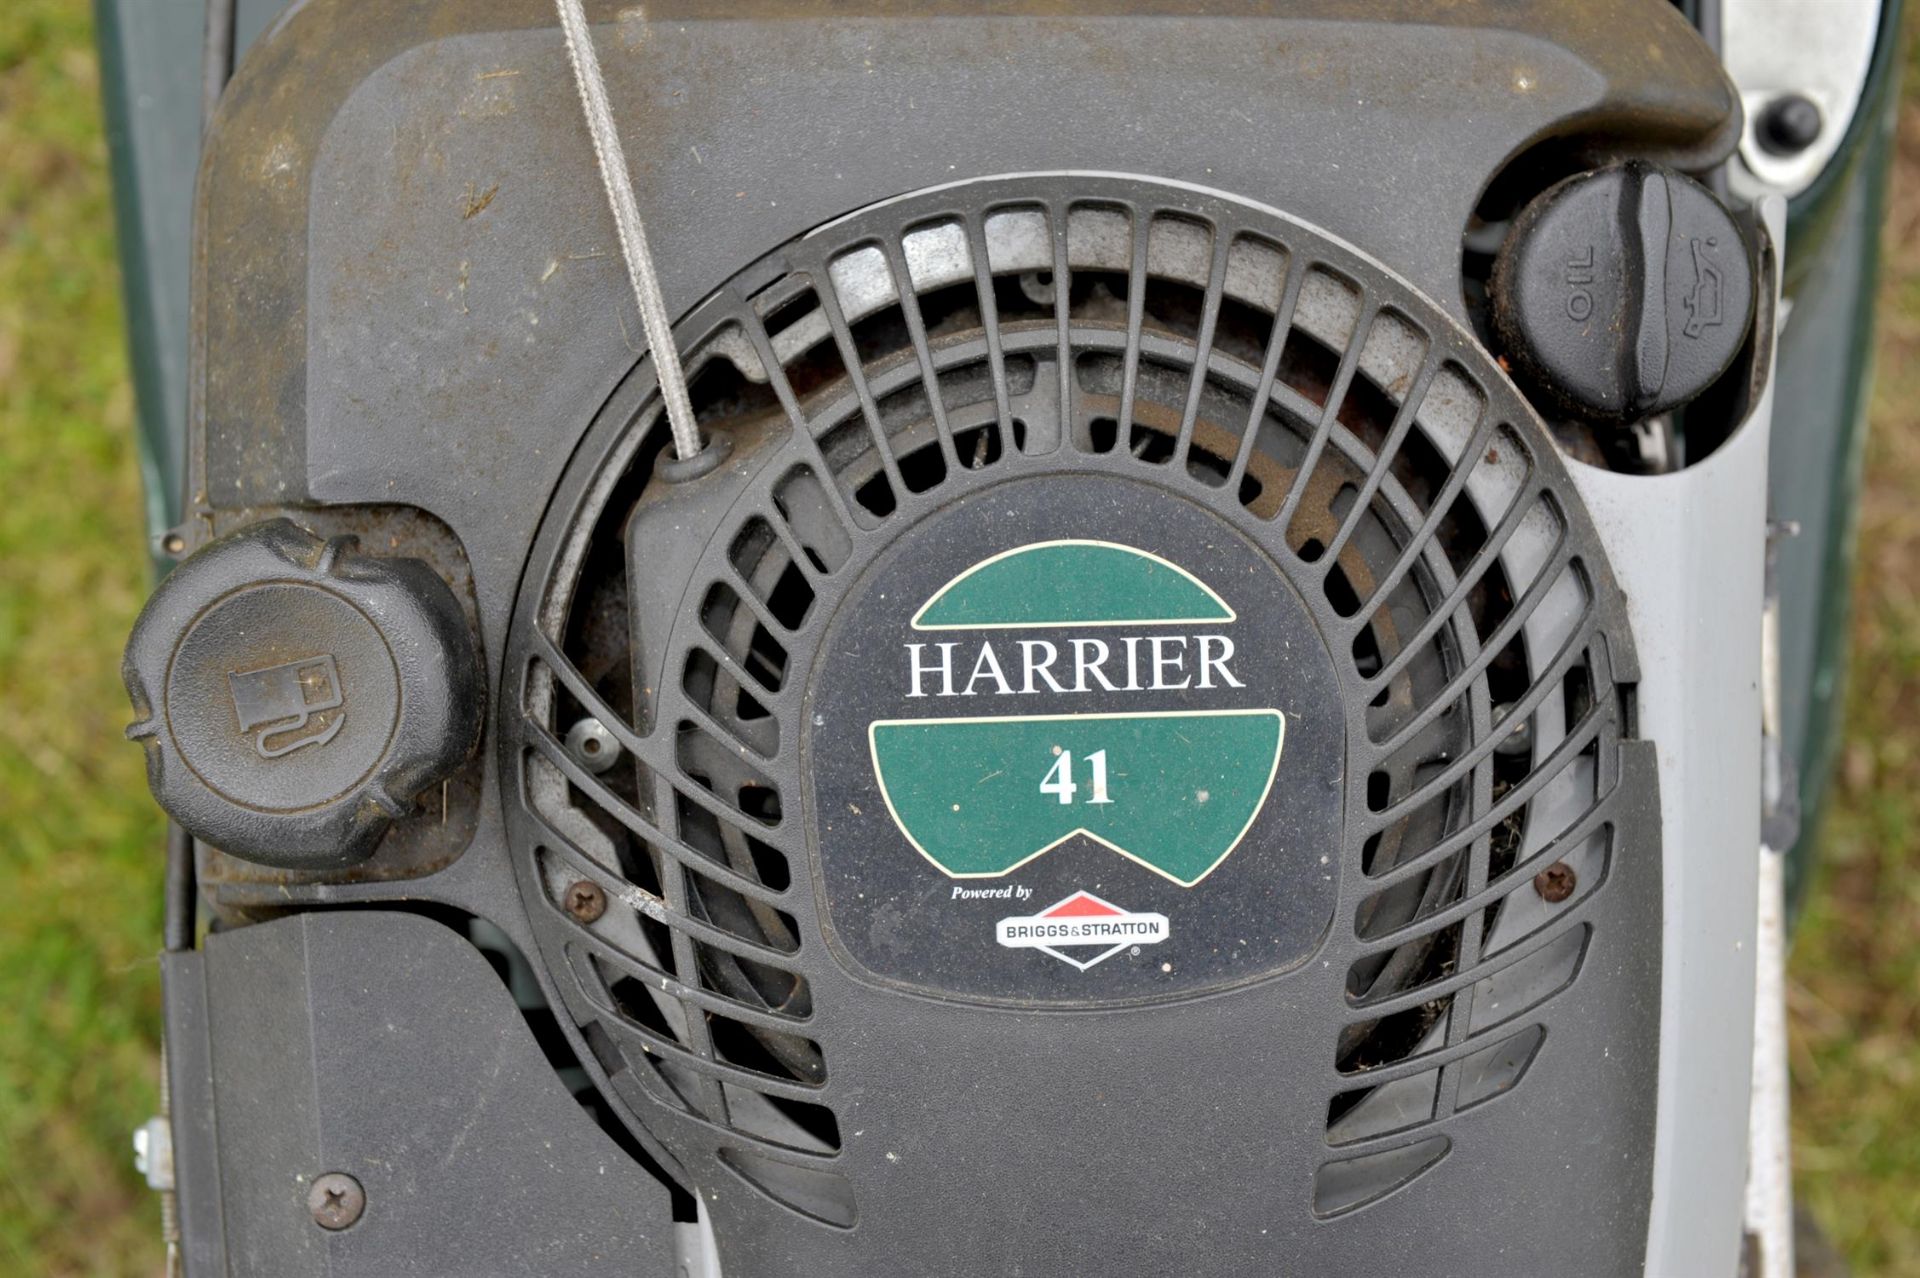 Hayter Harrier 41 lawnmower, Briggs & Stratton Lawn Mowers, purchased from Andrews of Hindhead - Image 9 of 9